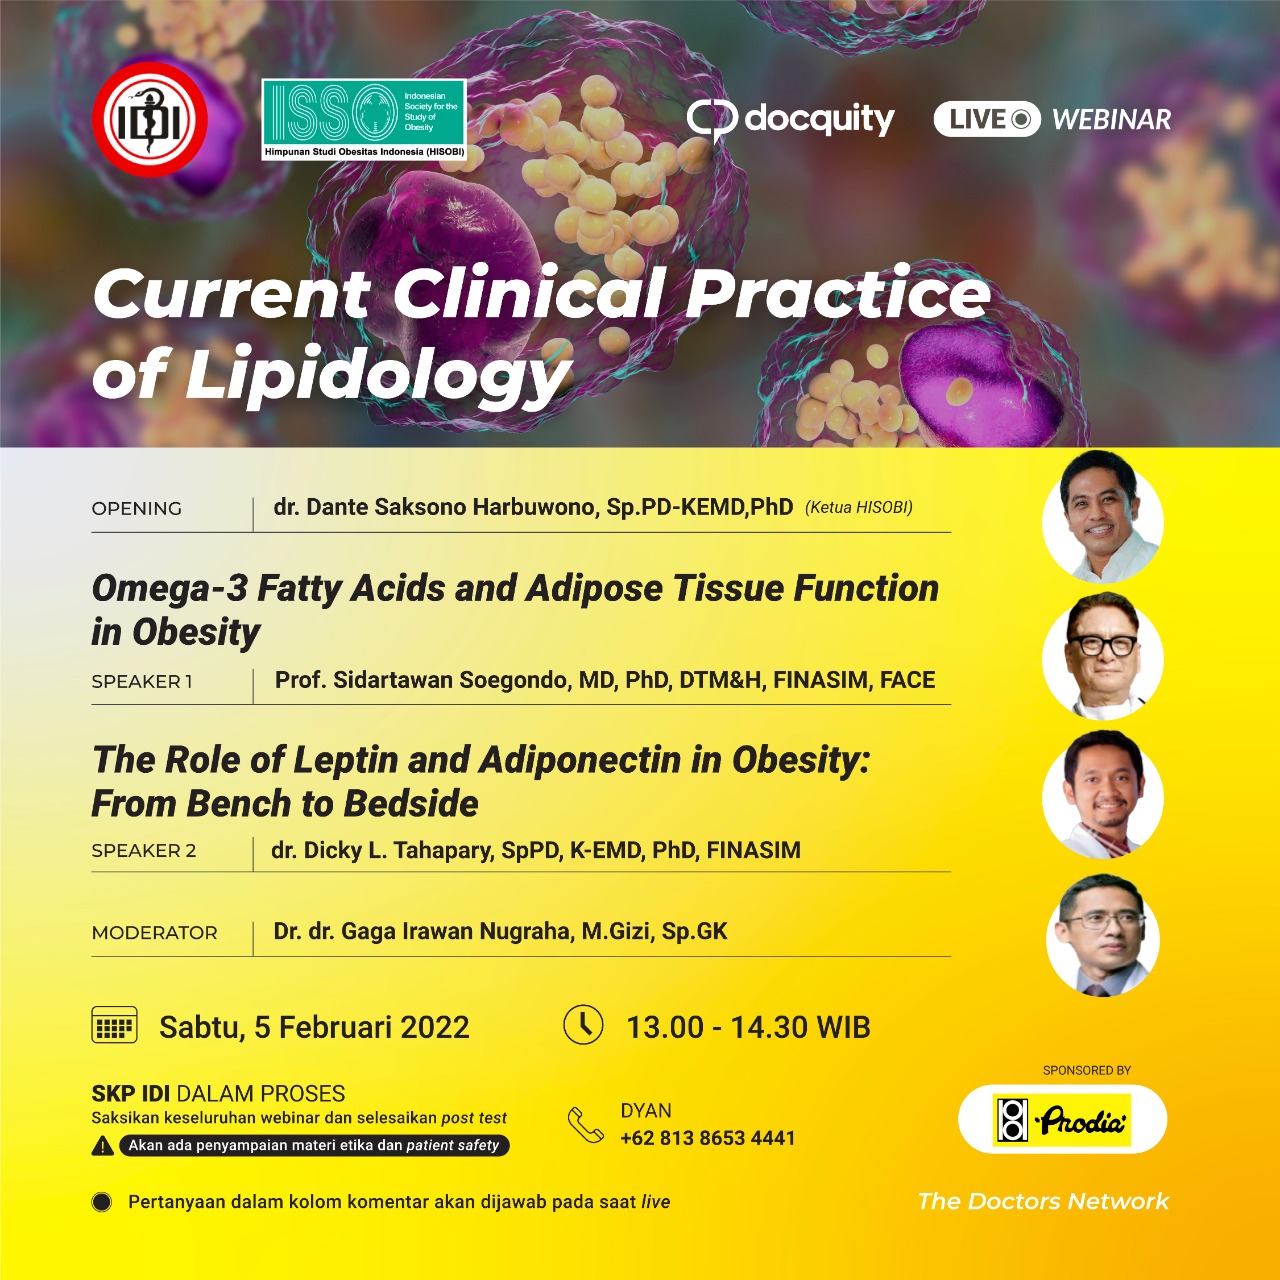 Current Clinical Practice of Lipidology